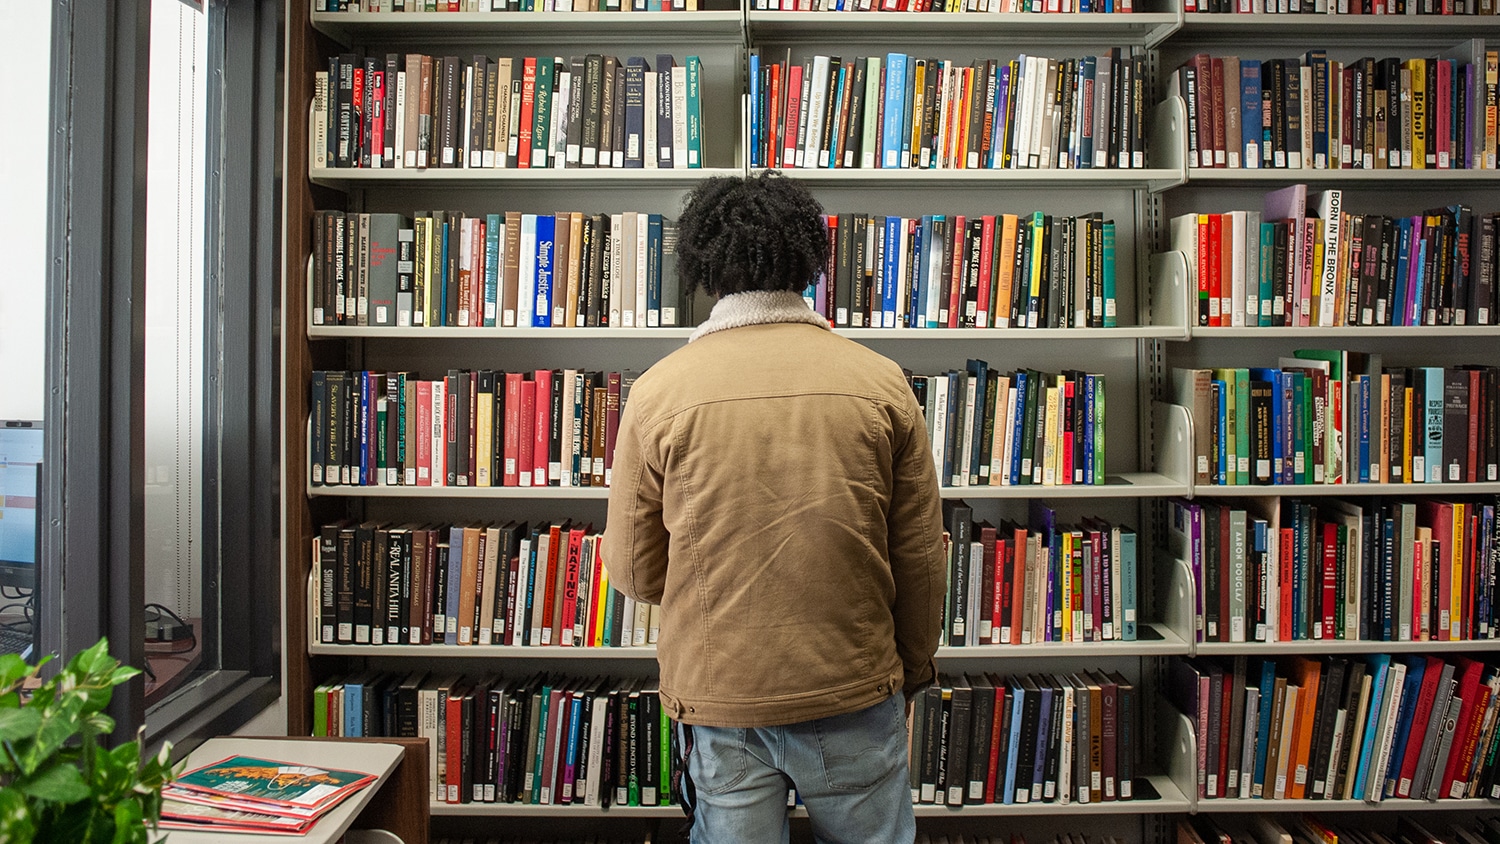 An NC State student explores the African American Cultural Center's robust library.